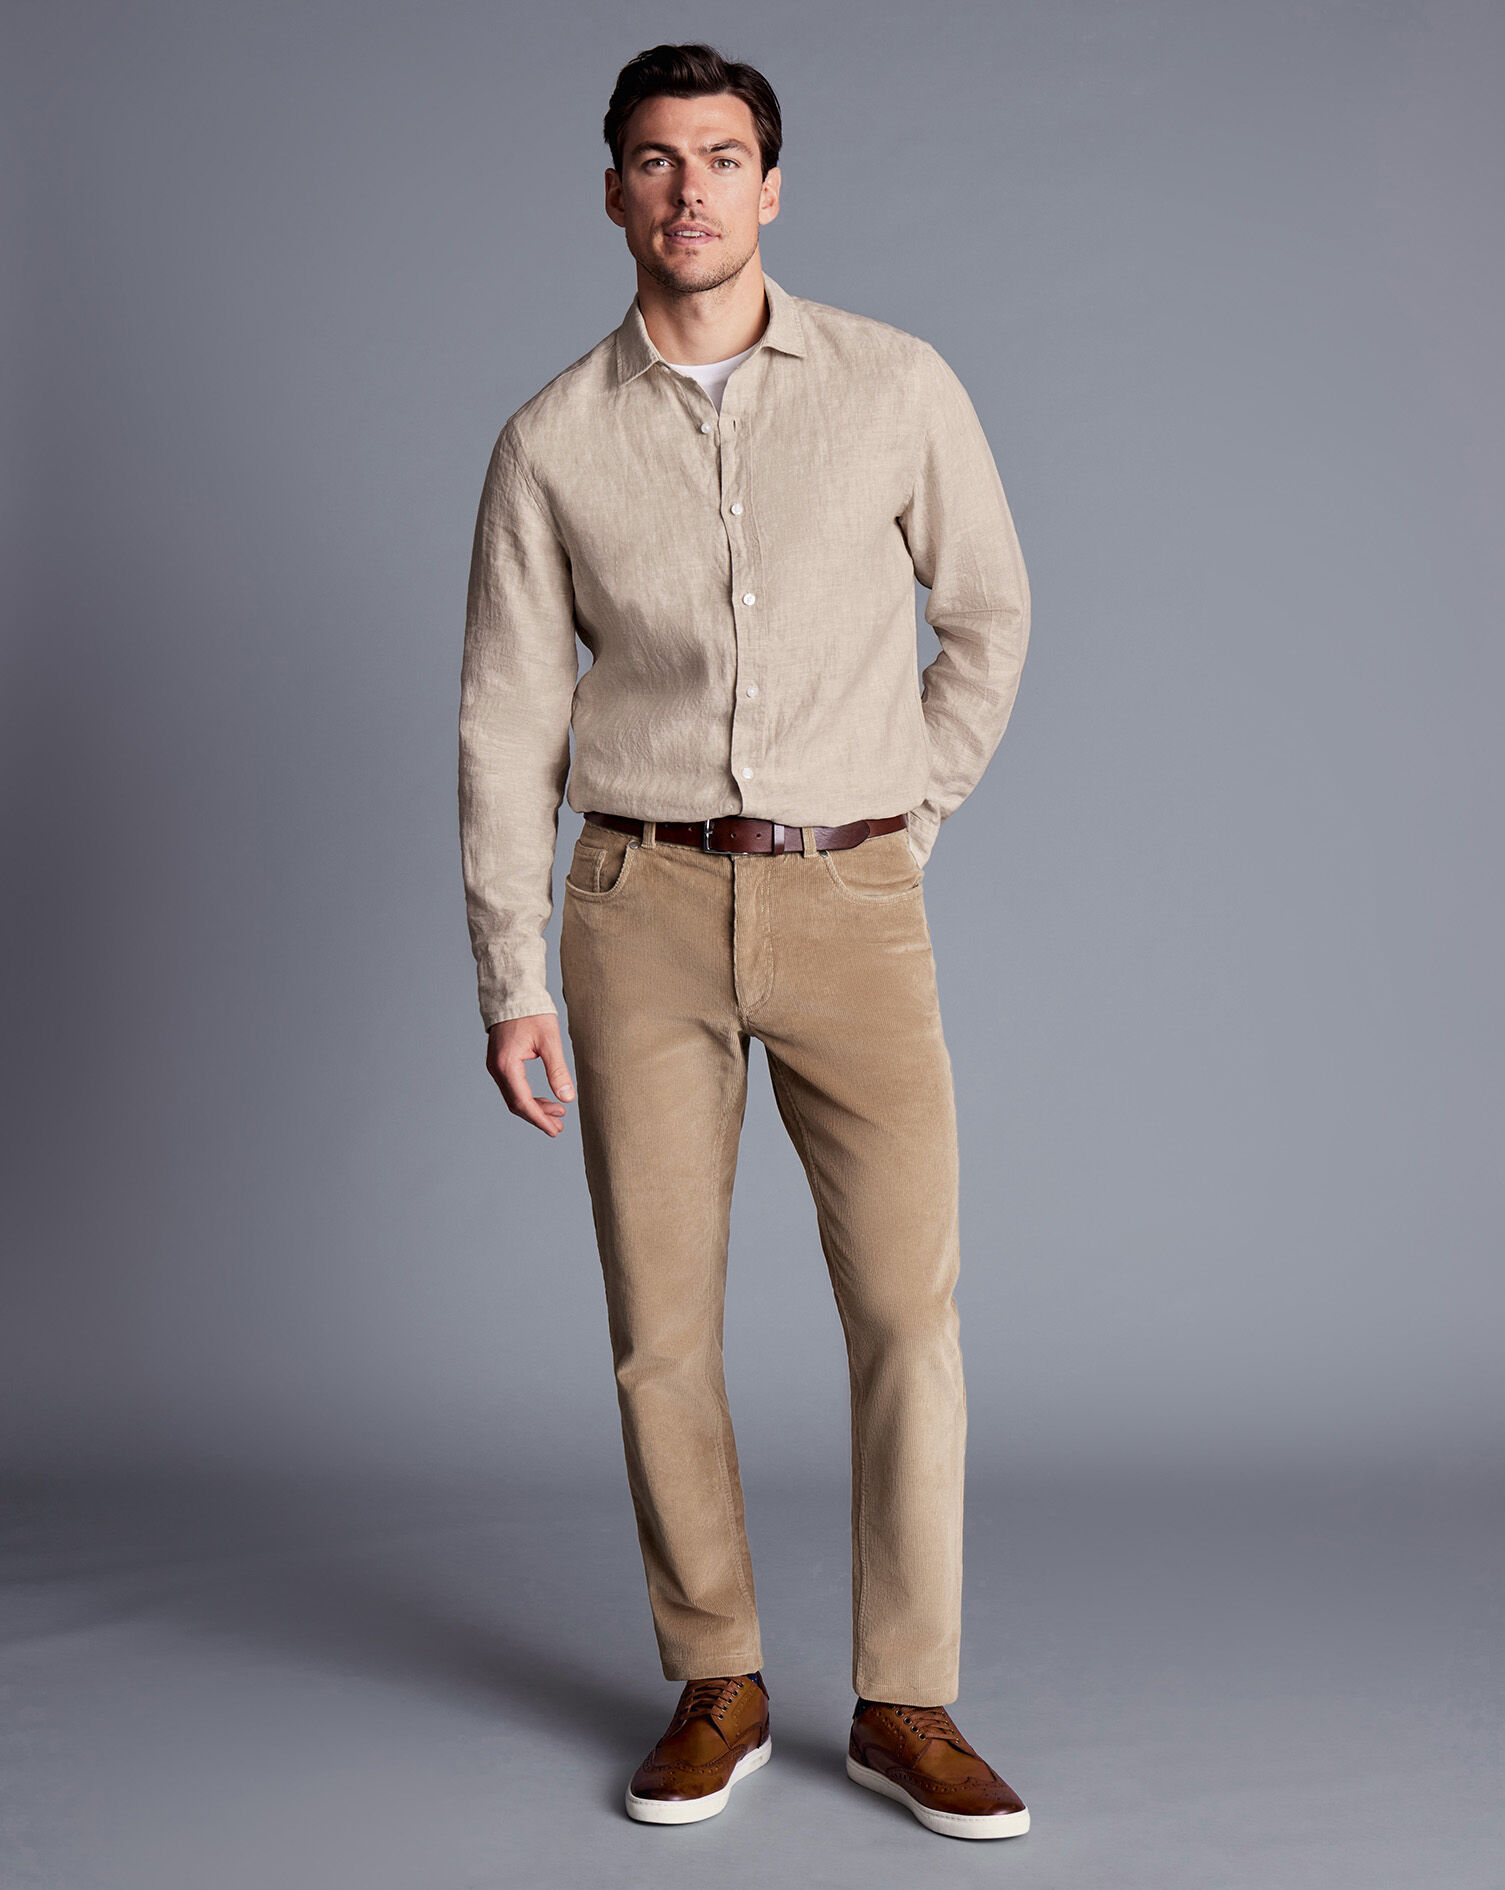 What Color Pants Go With Khaki, Beige, And Tan Shirts? • Ready Sleek